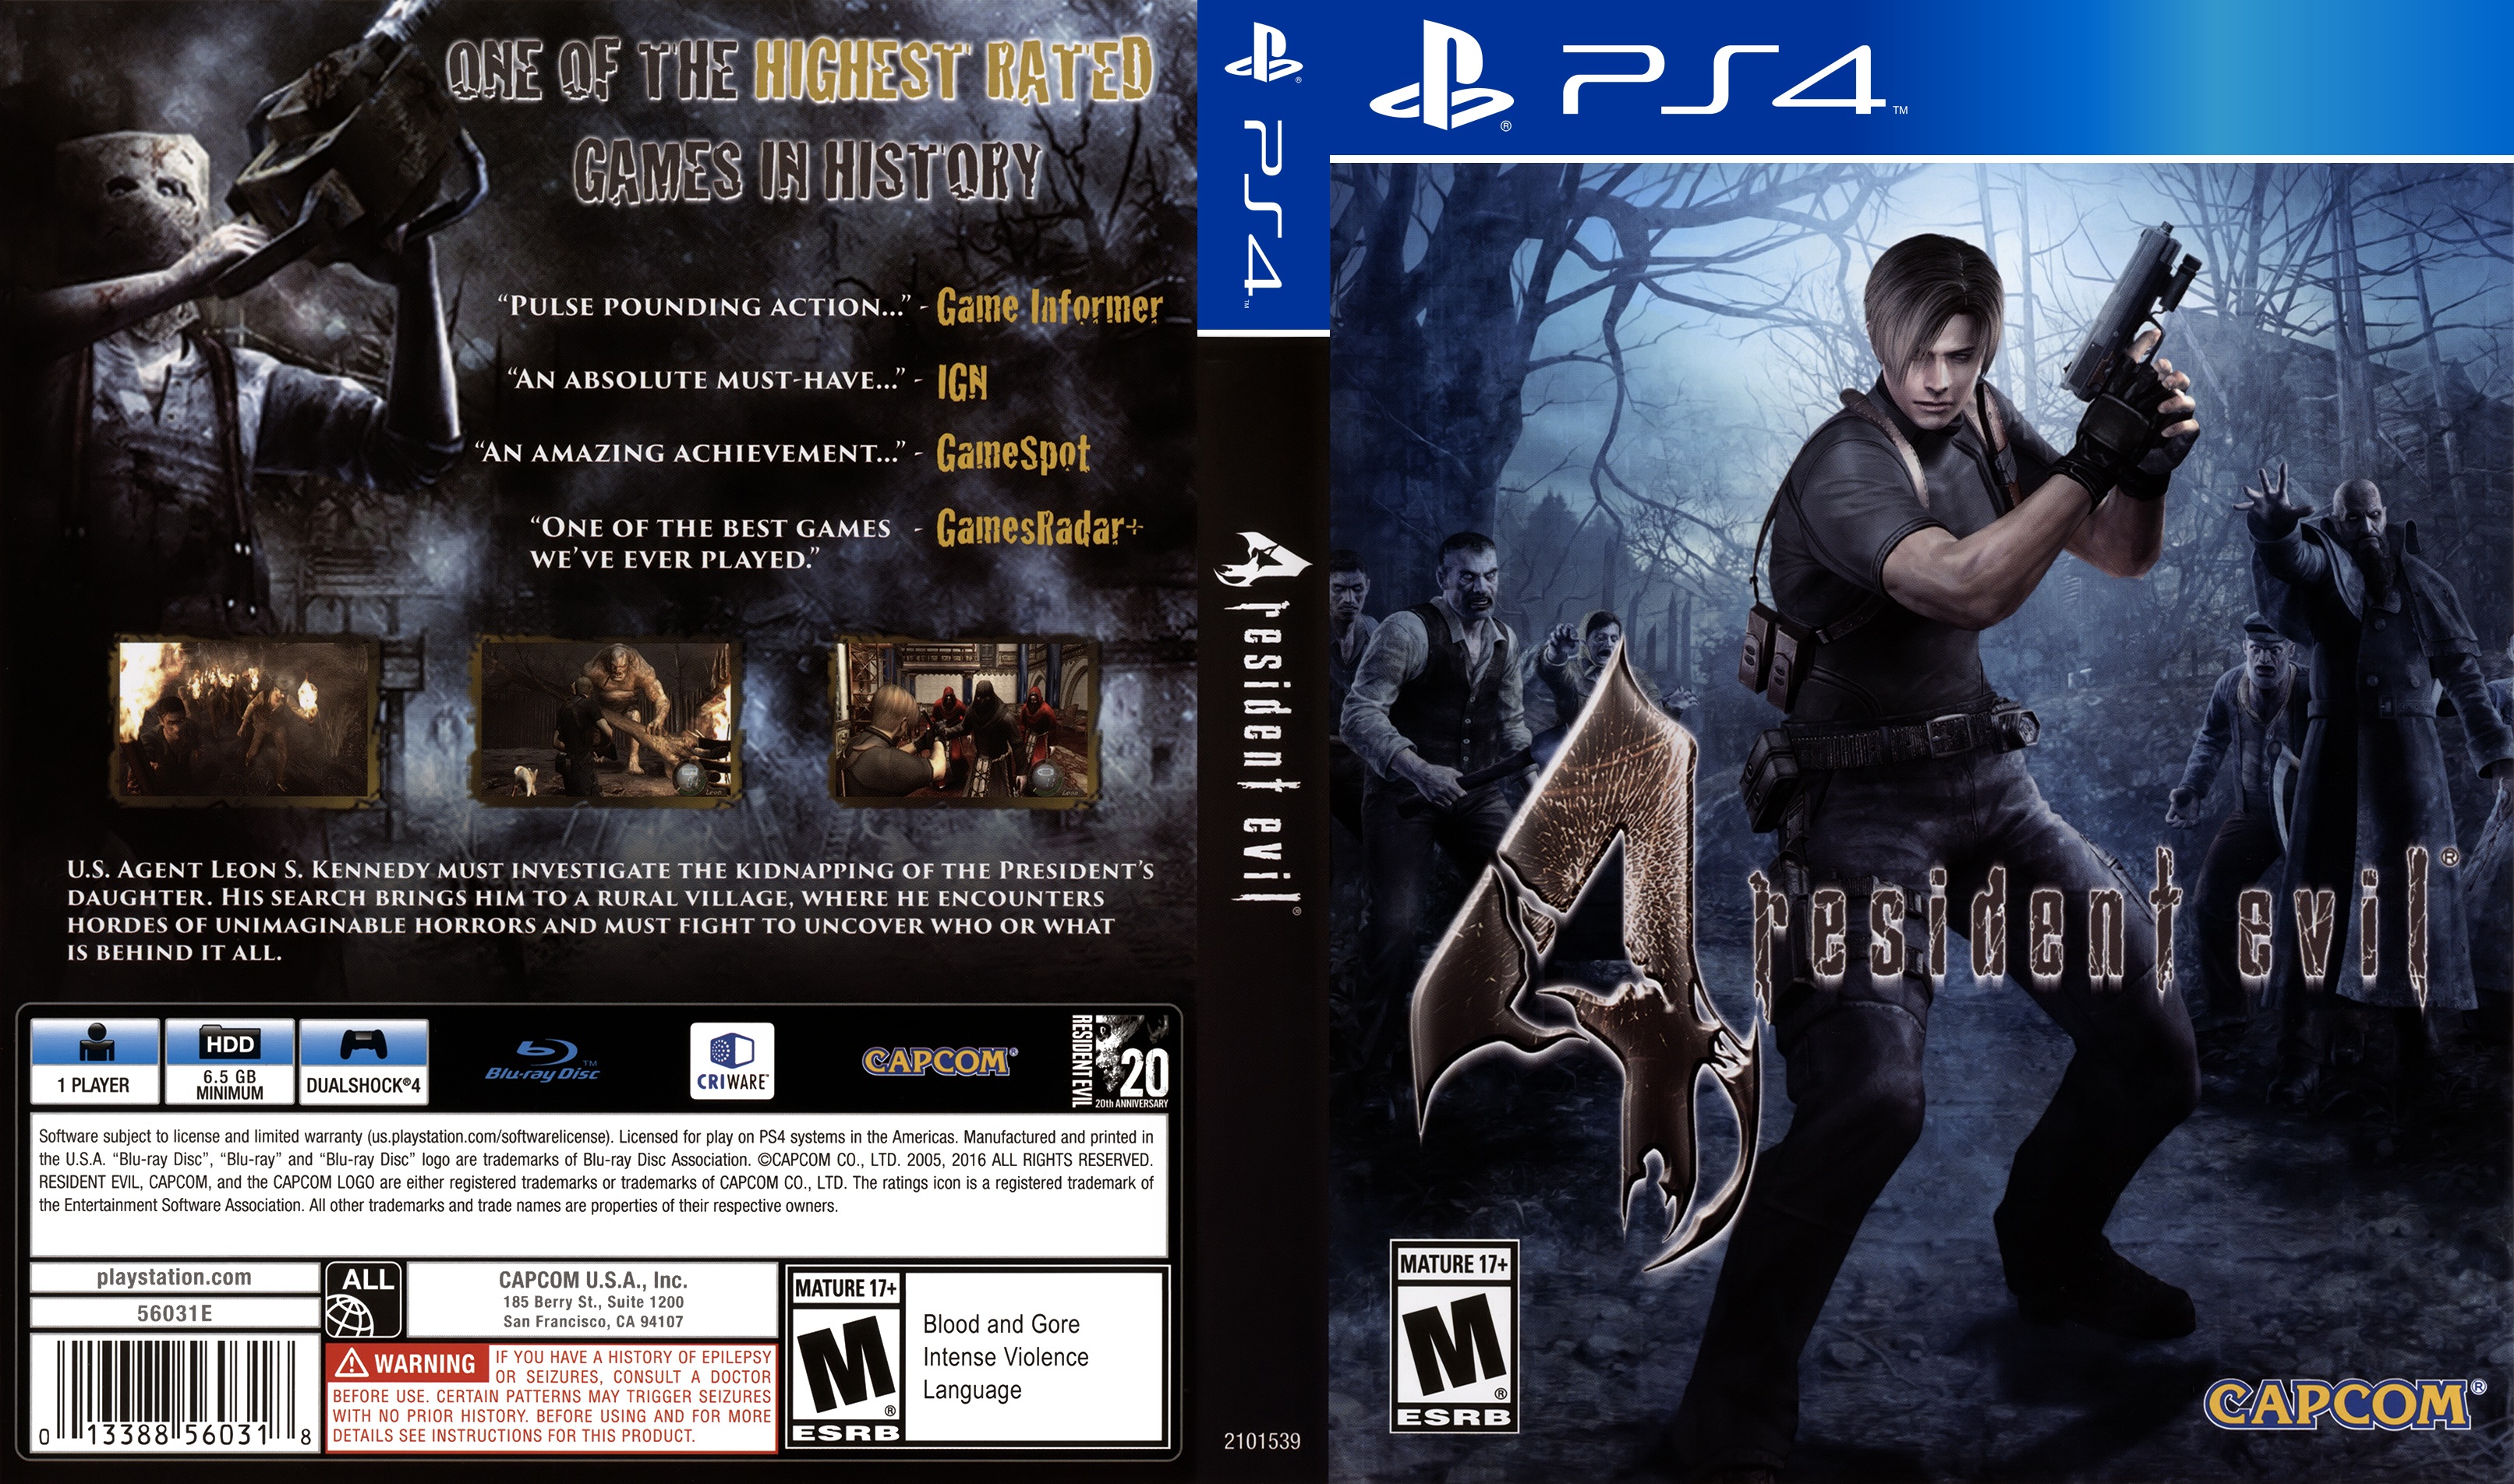 Ps4 игры resident evil. Resident Evil 4 ps4 диск. Resident Evil 4 PLAYSTATION 2 обложка. Resident Evil 4 ps2 обложка. Resident Evil 4 ps4 Cover.